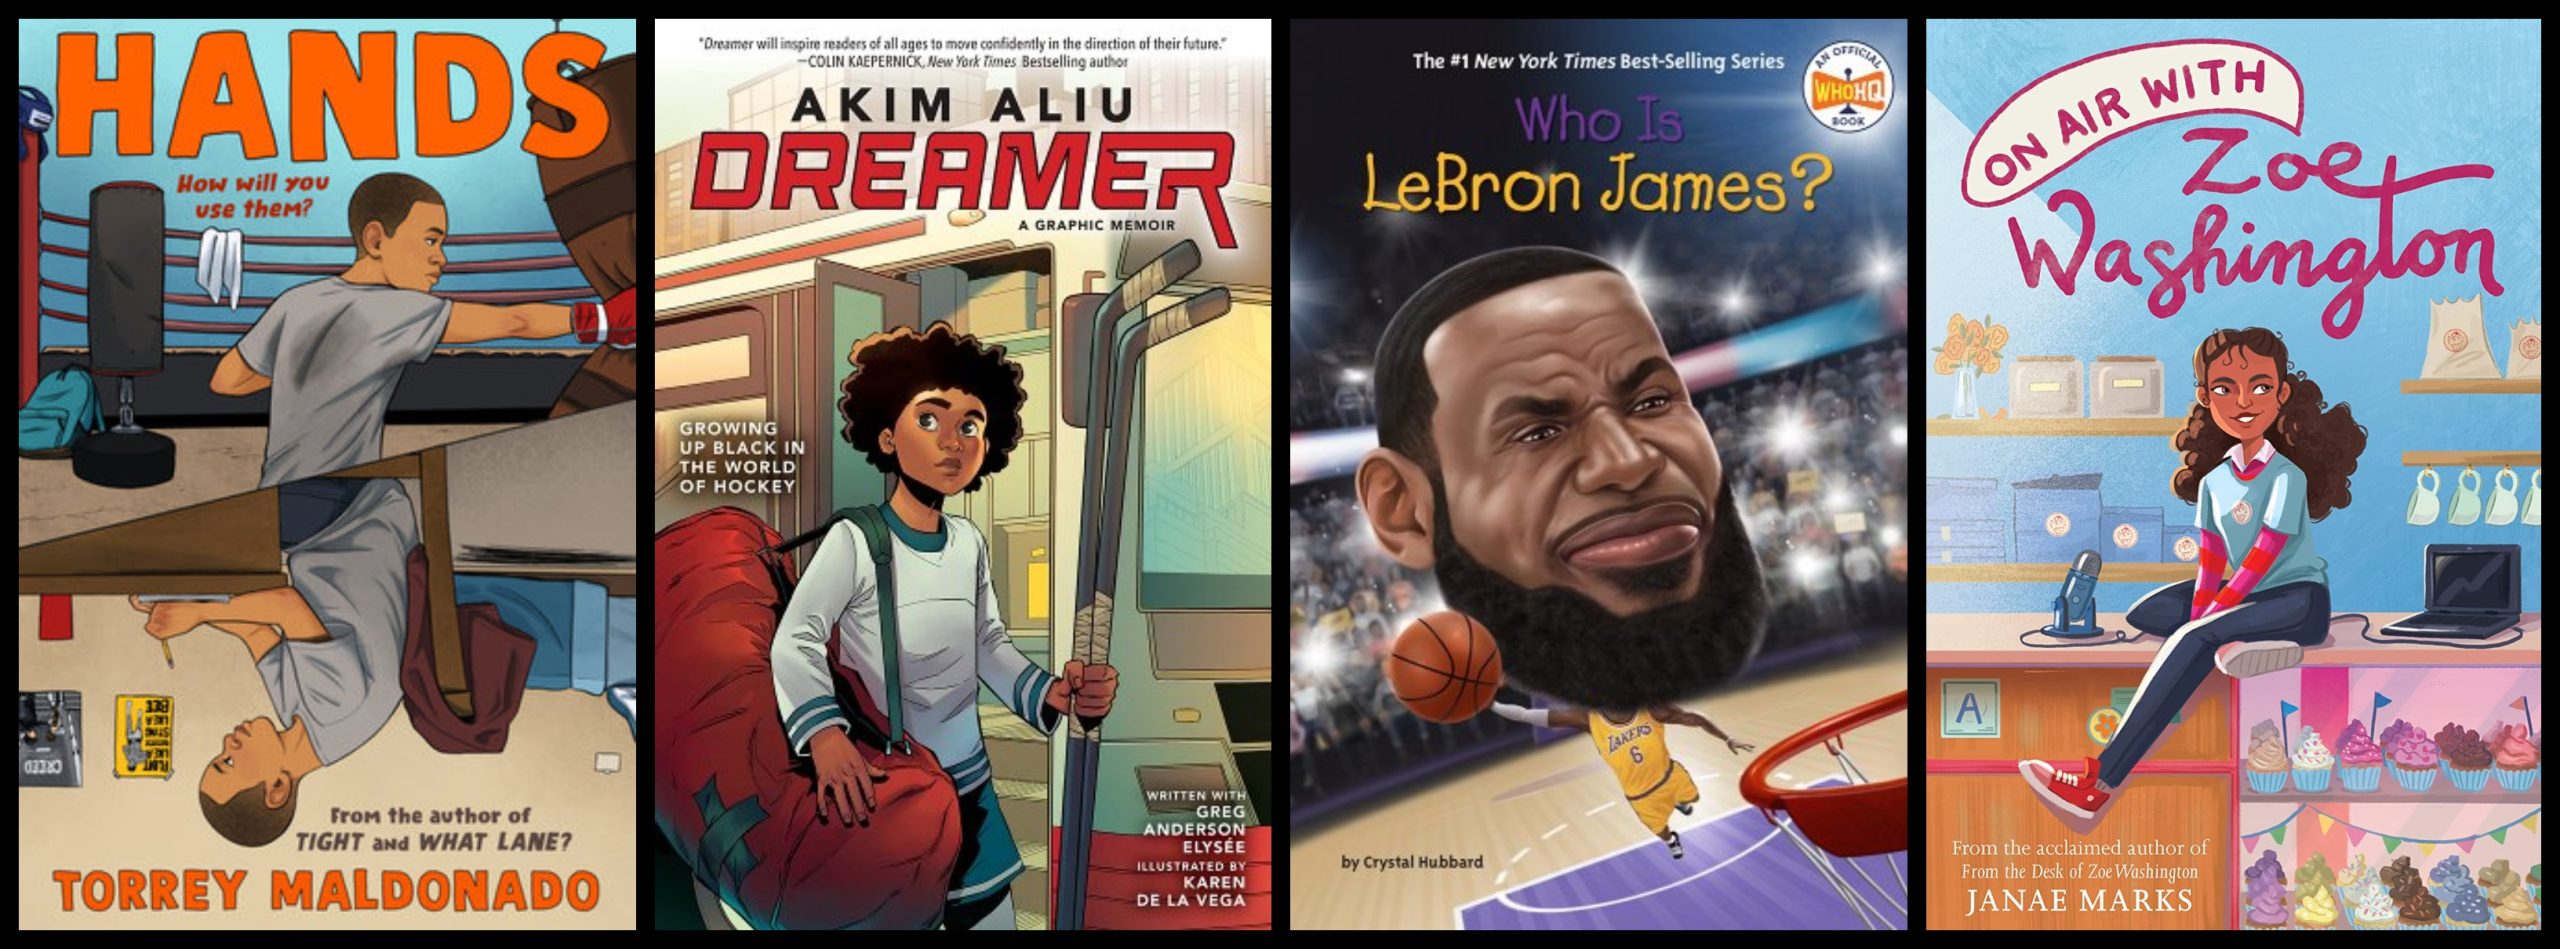 Who Is LeBron James? by Crystal Hubbard, Who HQ: 9780593387443 |  : Books